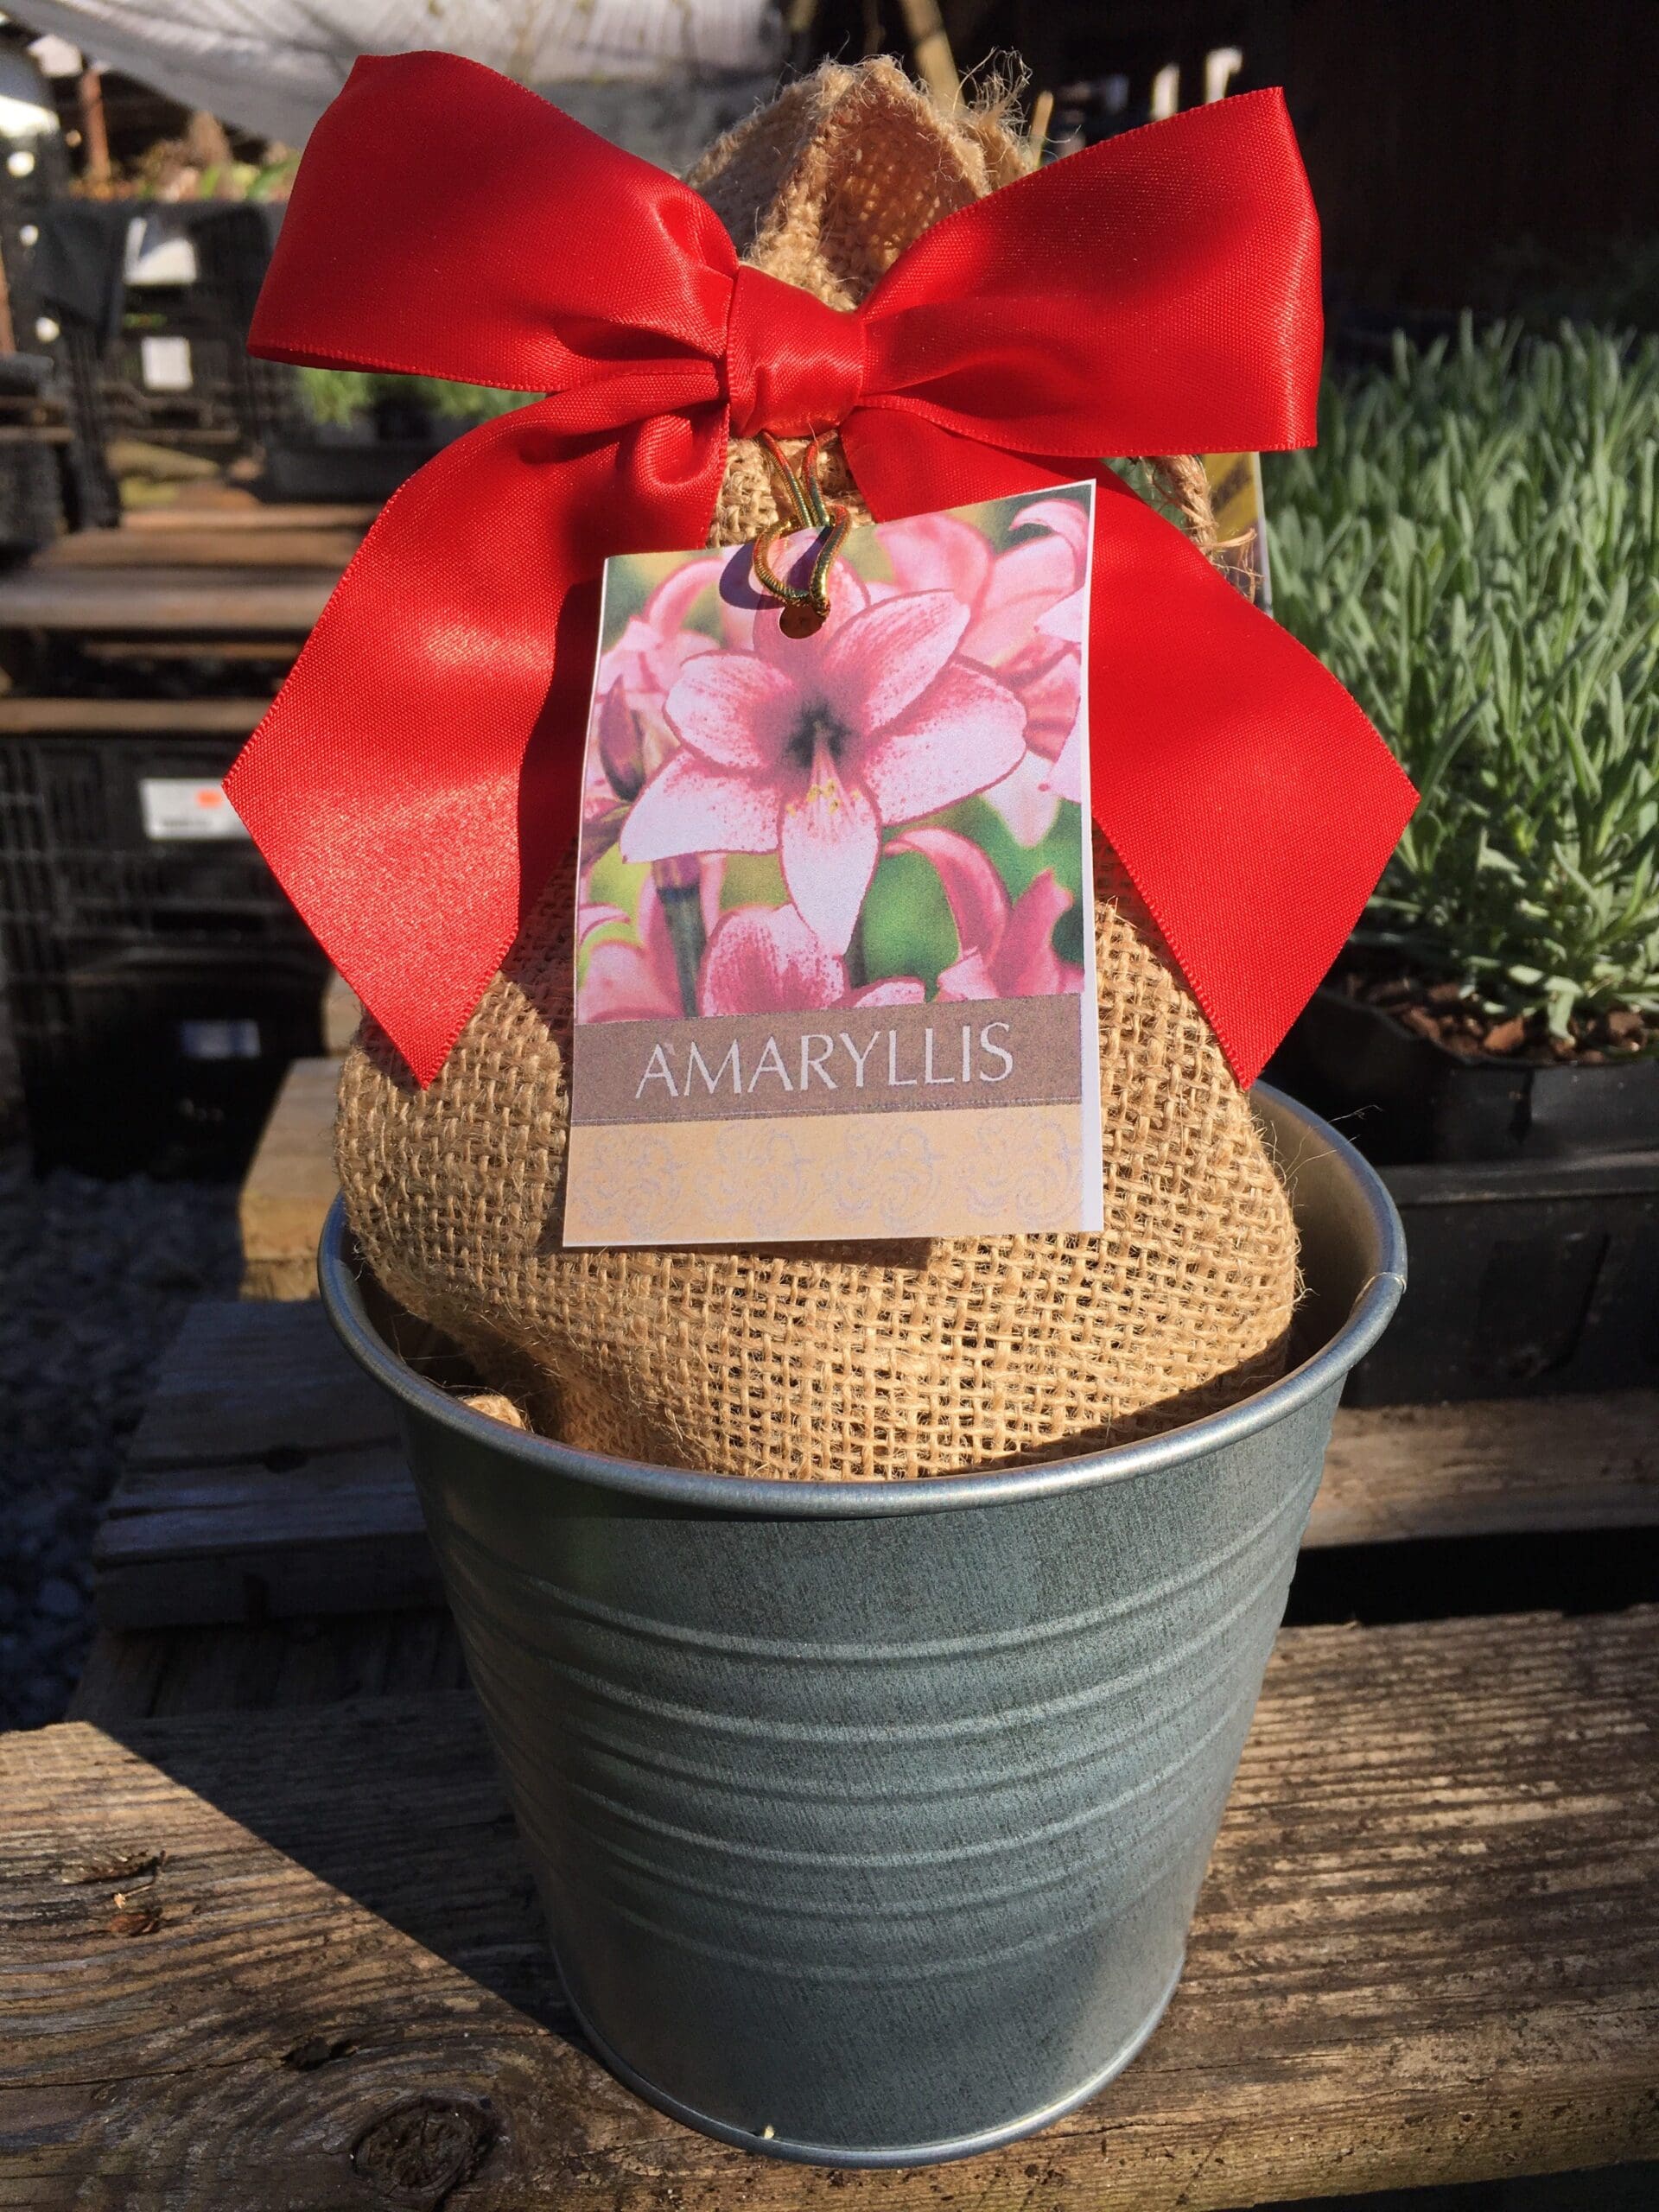 An amaryllis grow kit from our online plant nursery, an online nursery for amaryllis grow kits, tulip bulb mix, citronella plants, fast growing trees, paperwhite bulb mix, pink muhly grass and more!